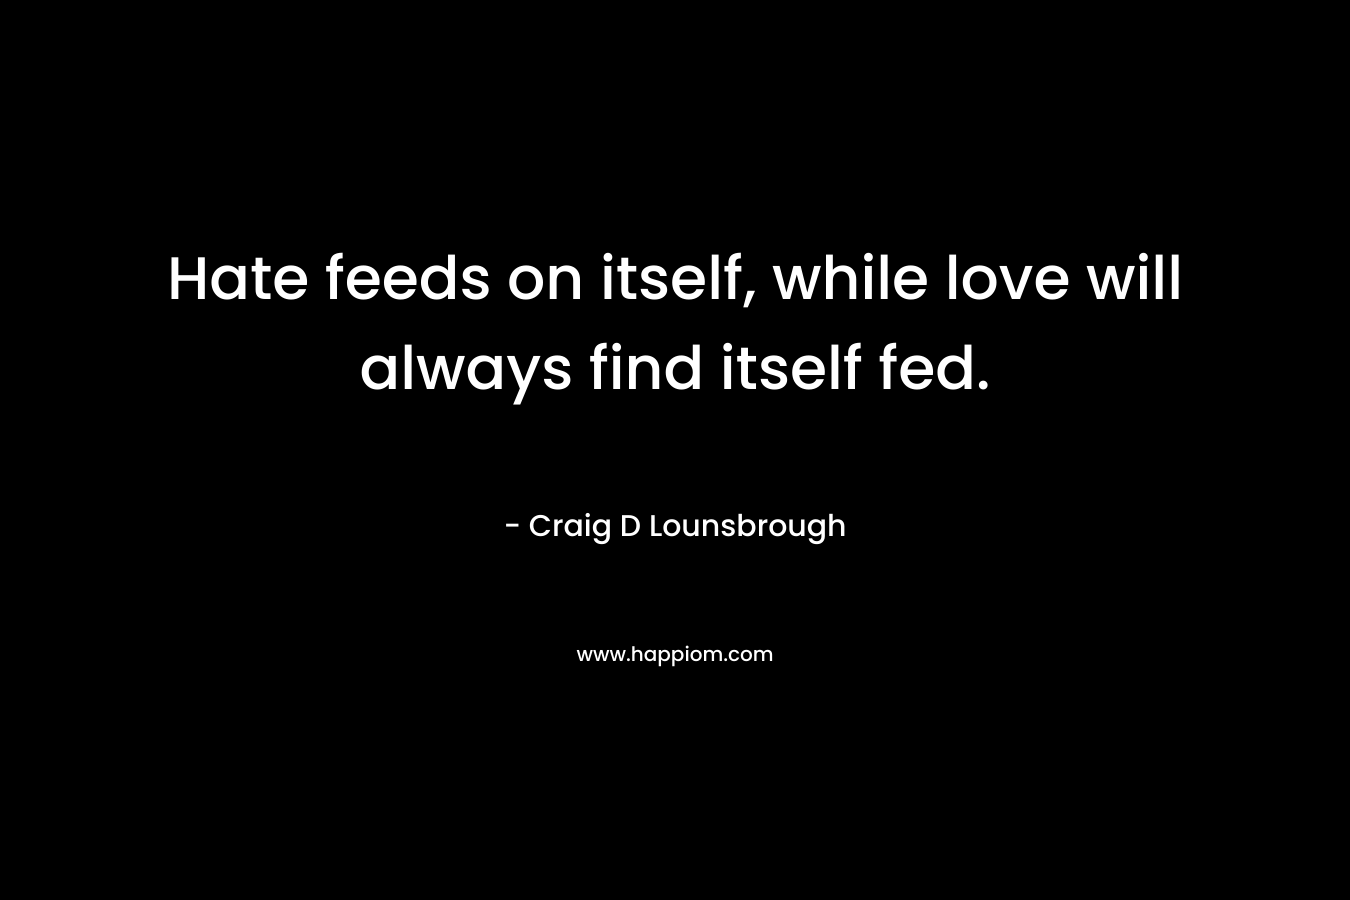 Hate feeds on itself, while love will always find itself fed.